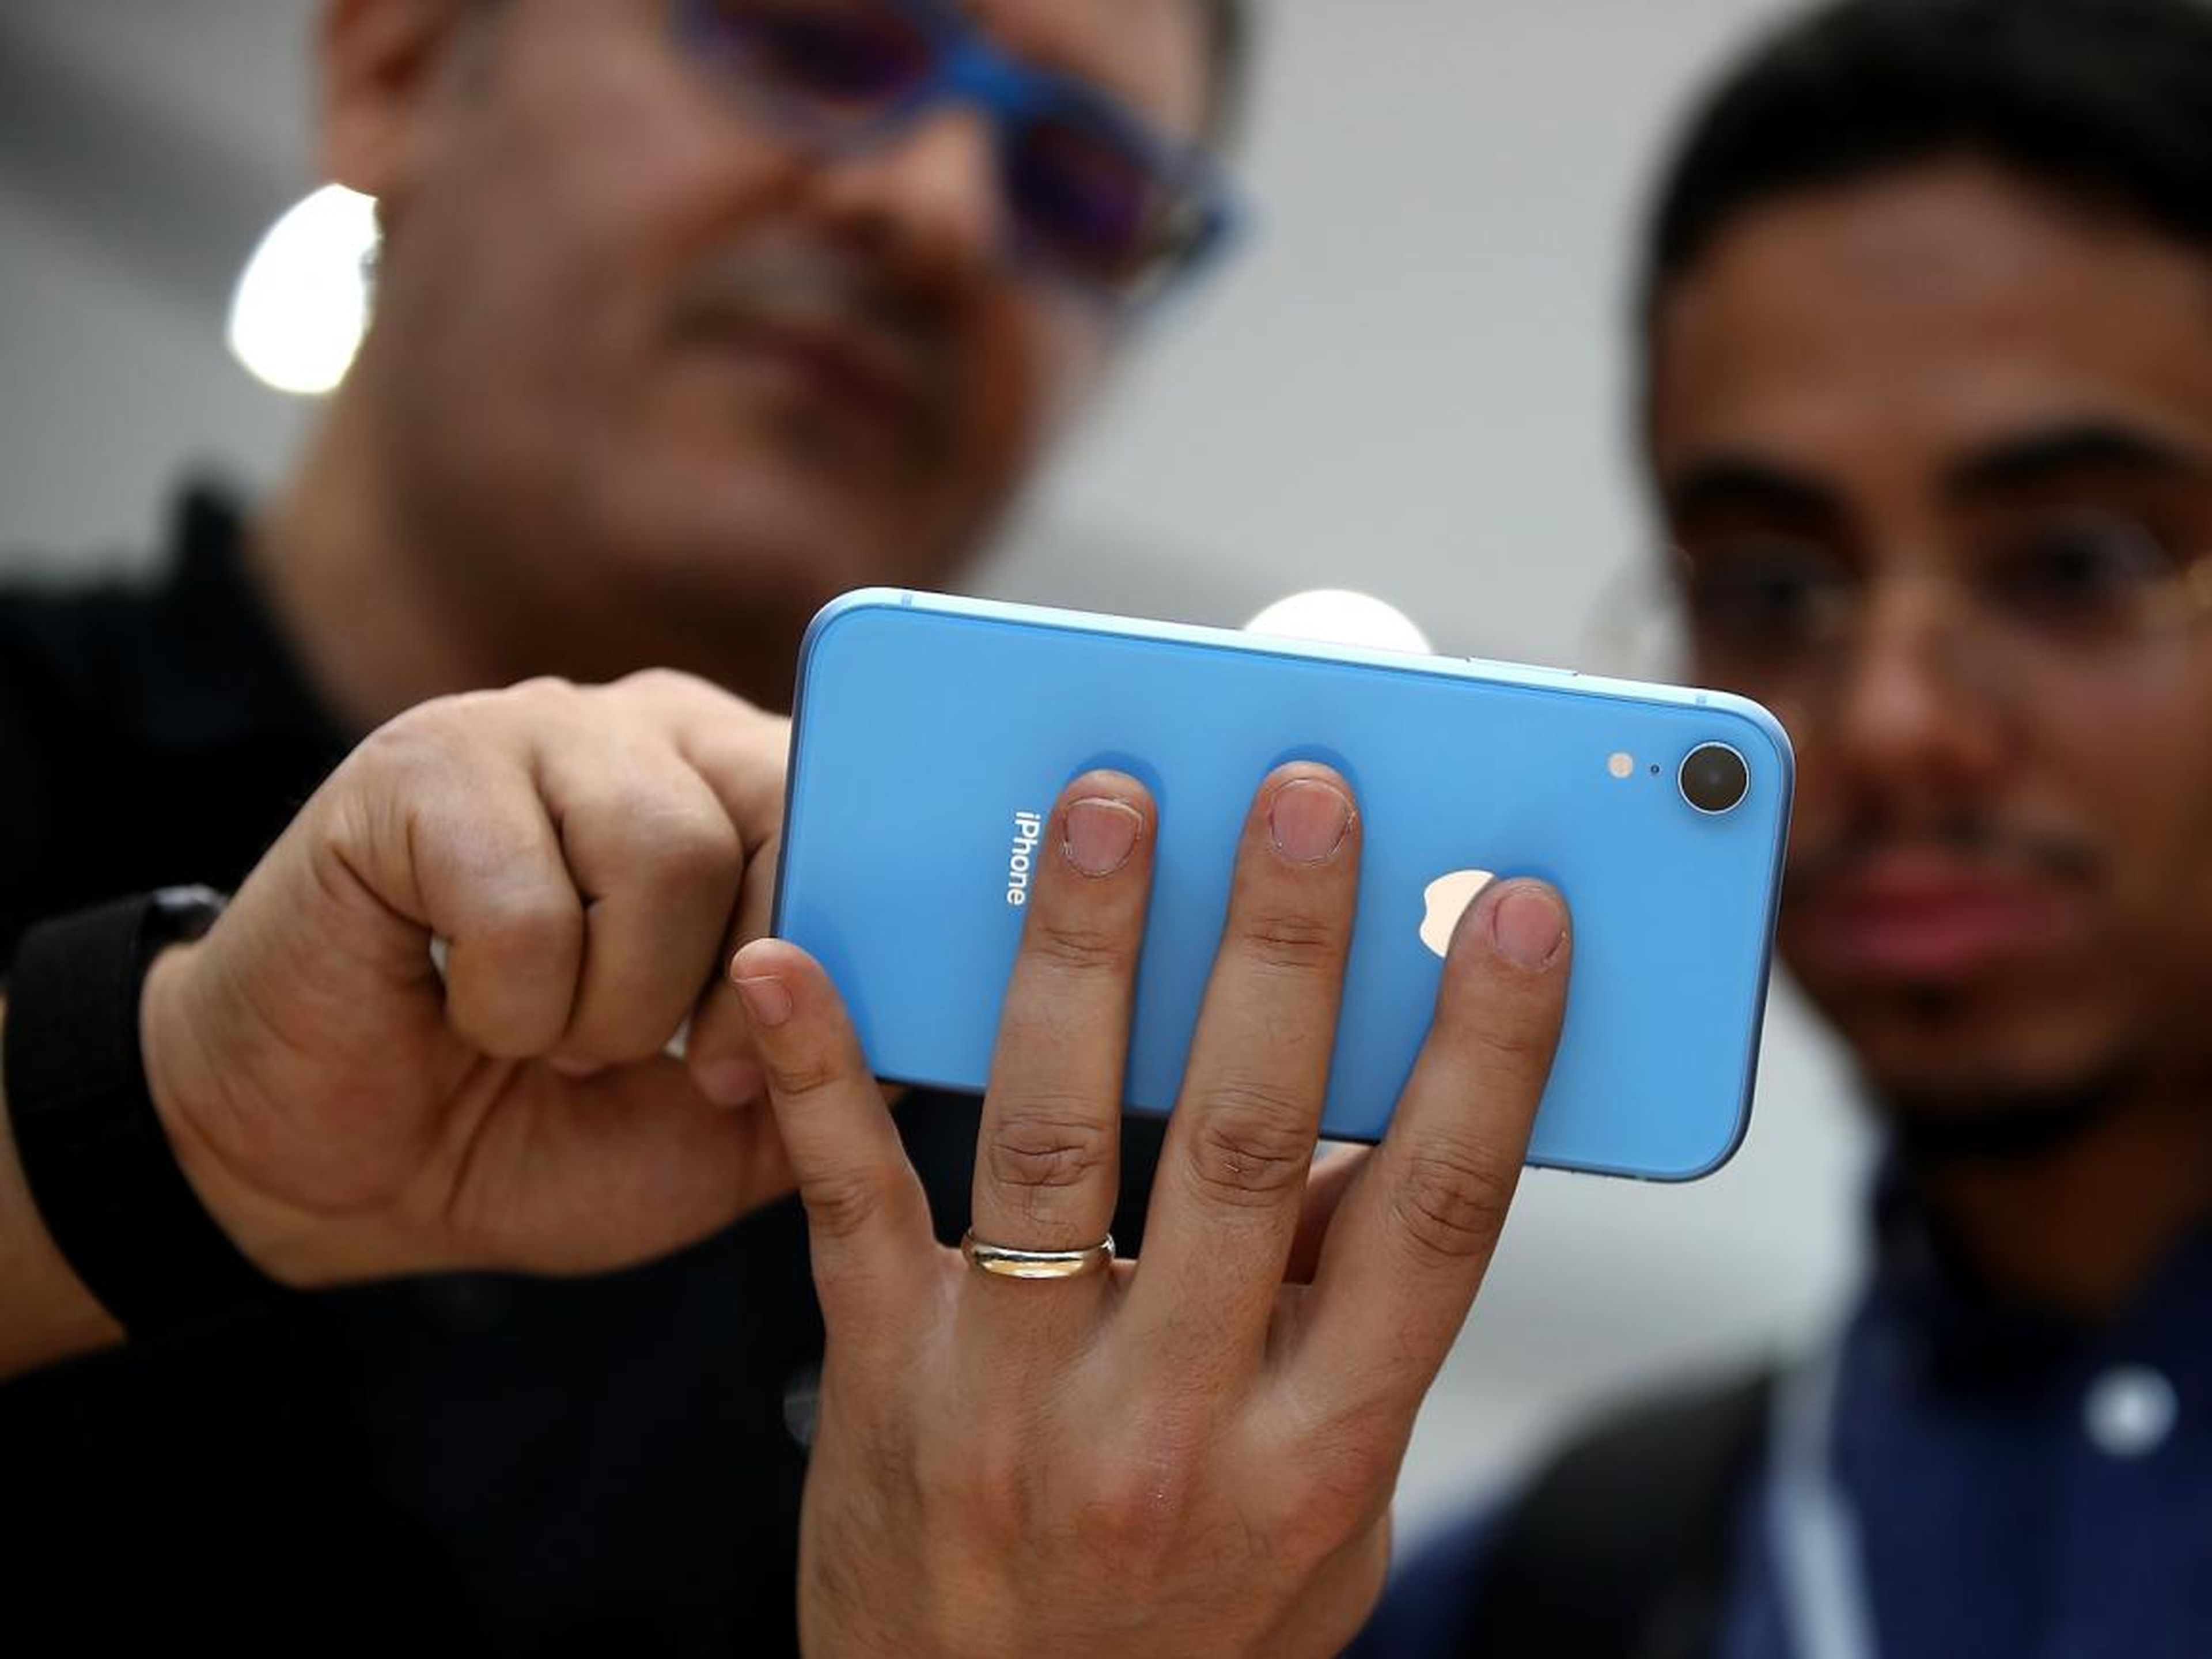 2. But a lot of signs also point to slower demand for Apple's iPhones specifically, especially the new midrange iPhone XR, which costs $750. Several Apple suppliers that make parts for that device have slashed their forecasts in